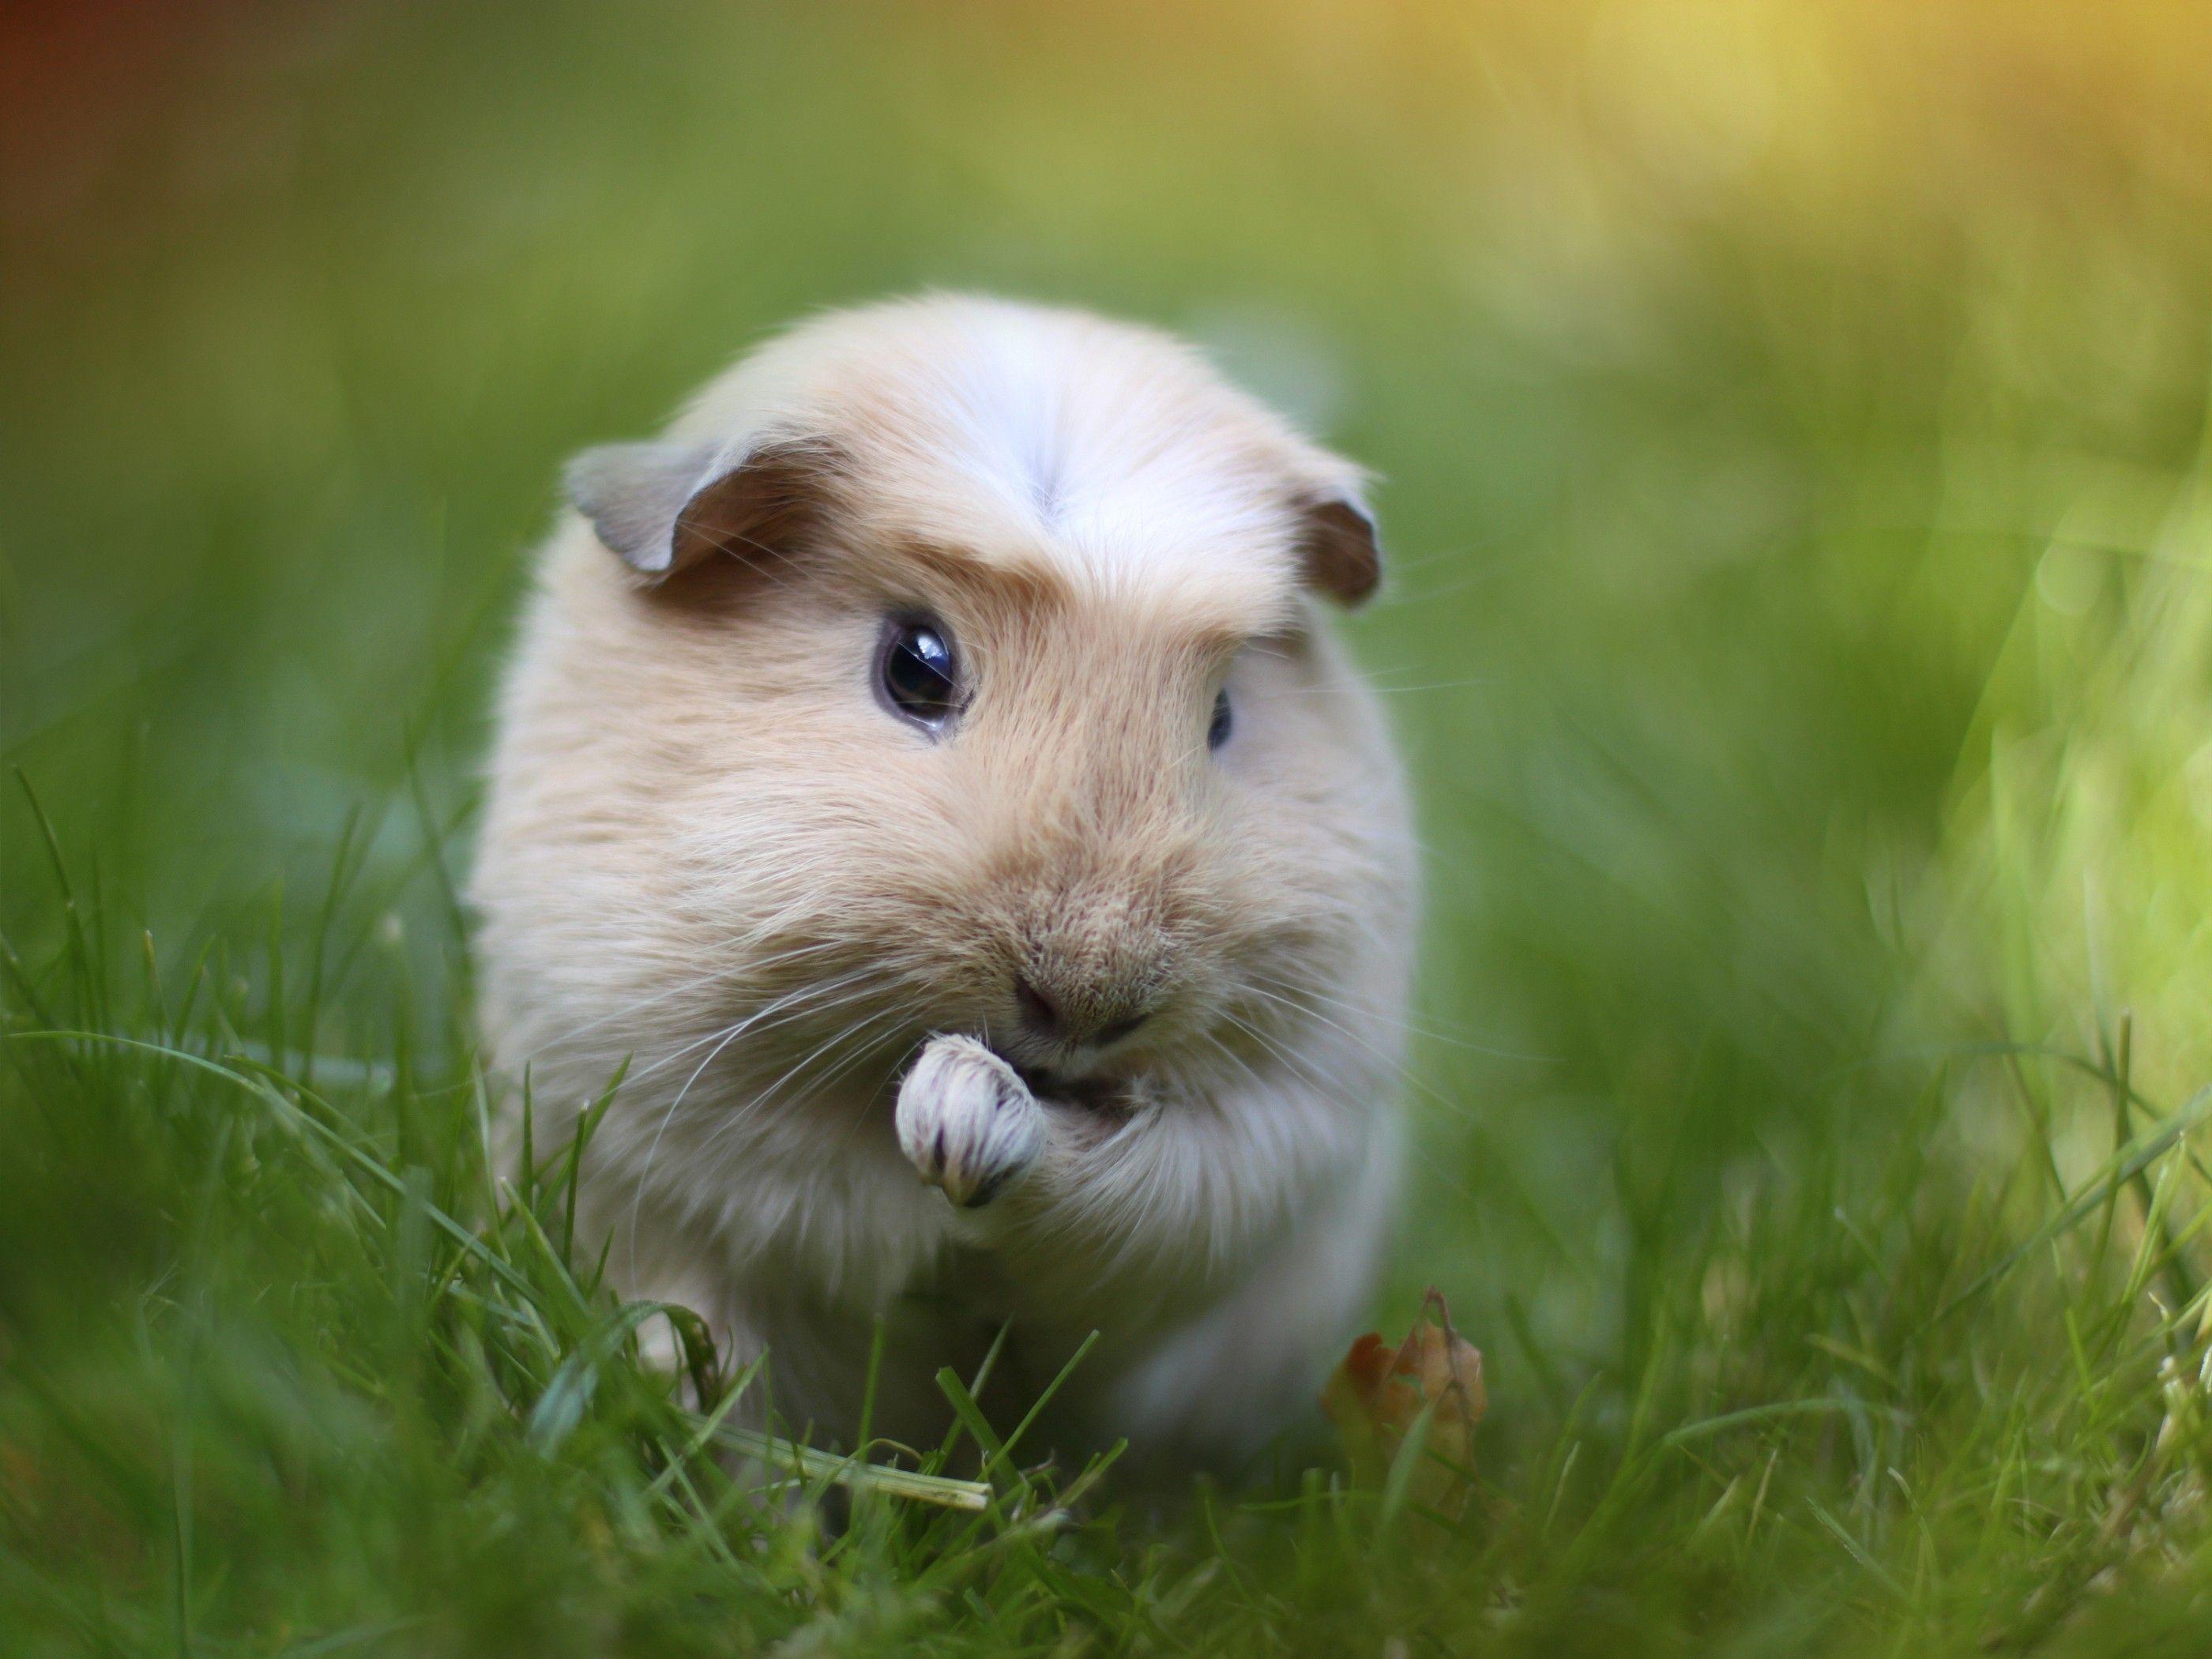 Rodent Guinea Pig Close Up (id: 184748)